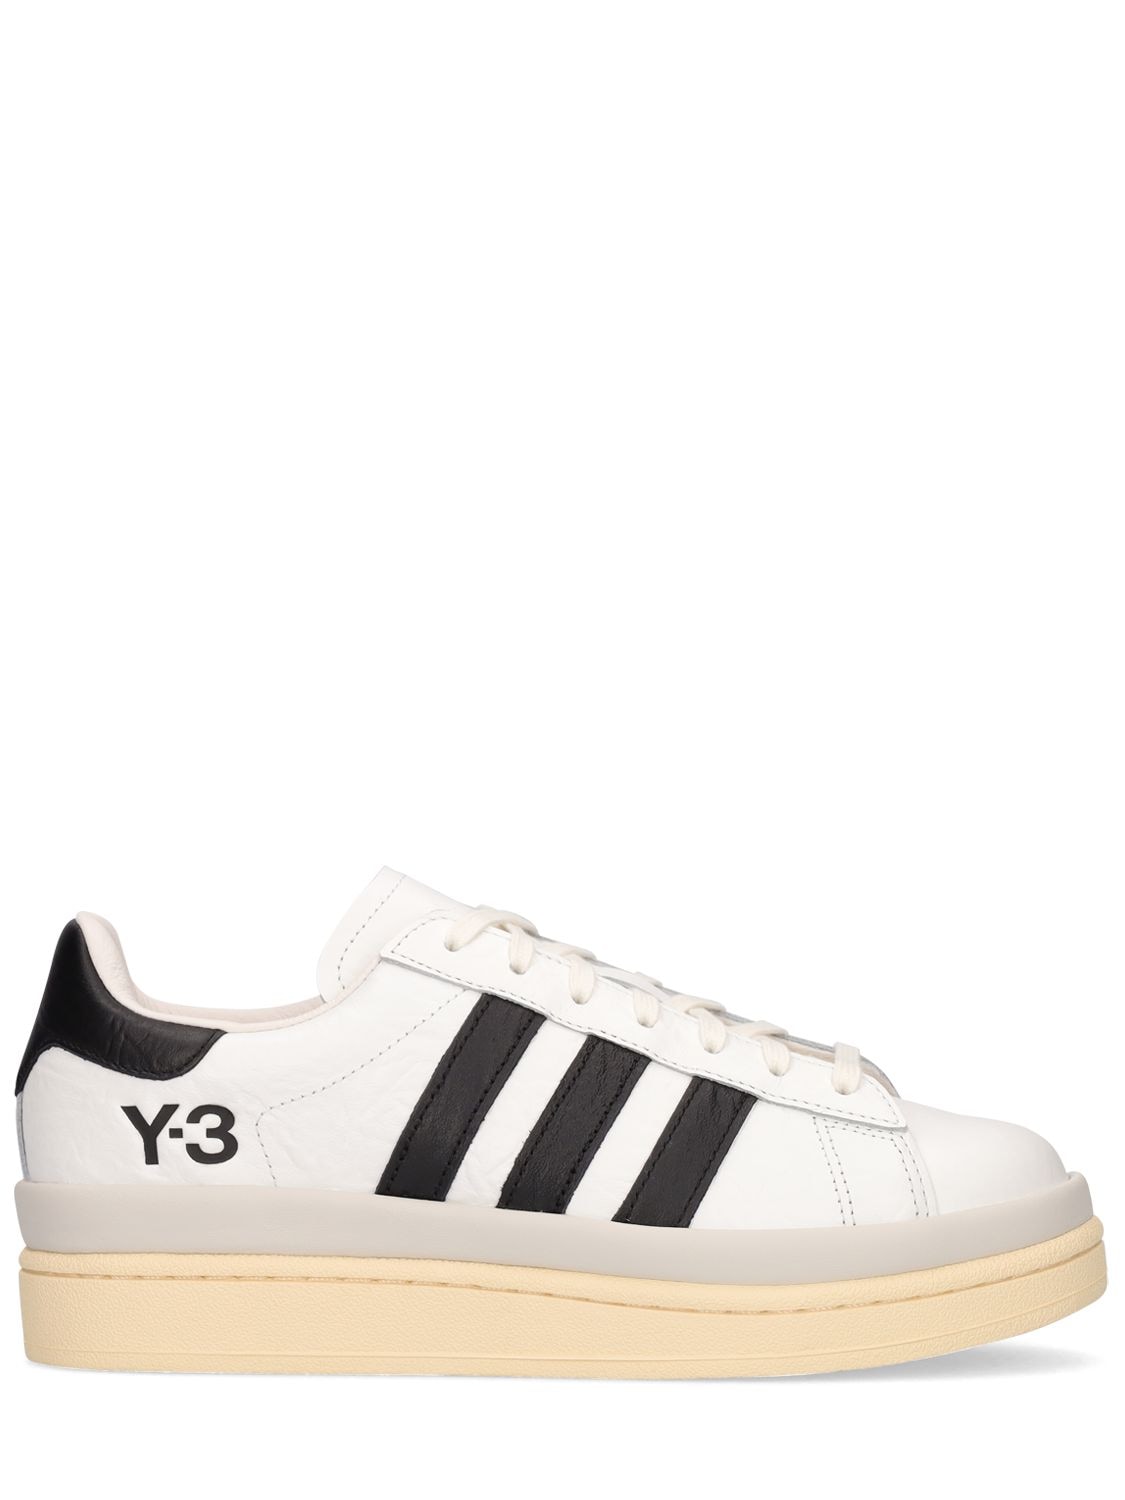 Y-3 Shoes for Women | ModeSens